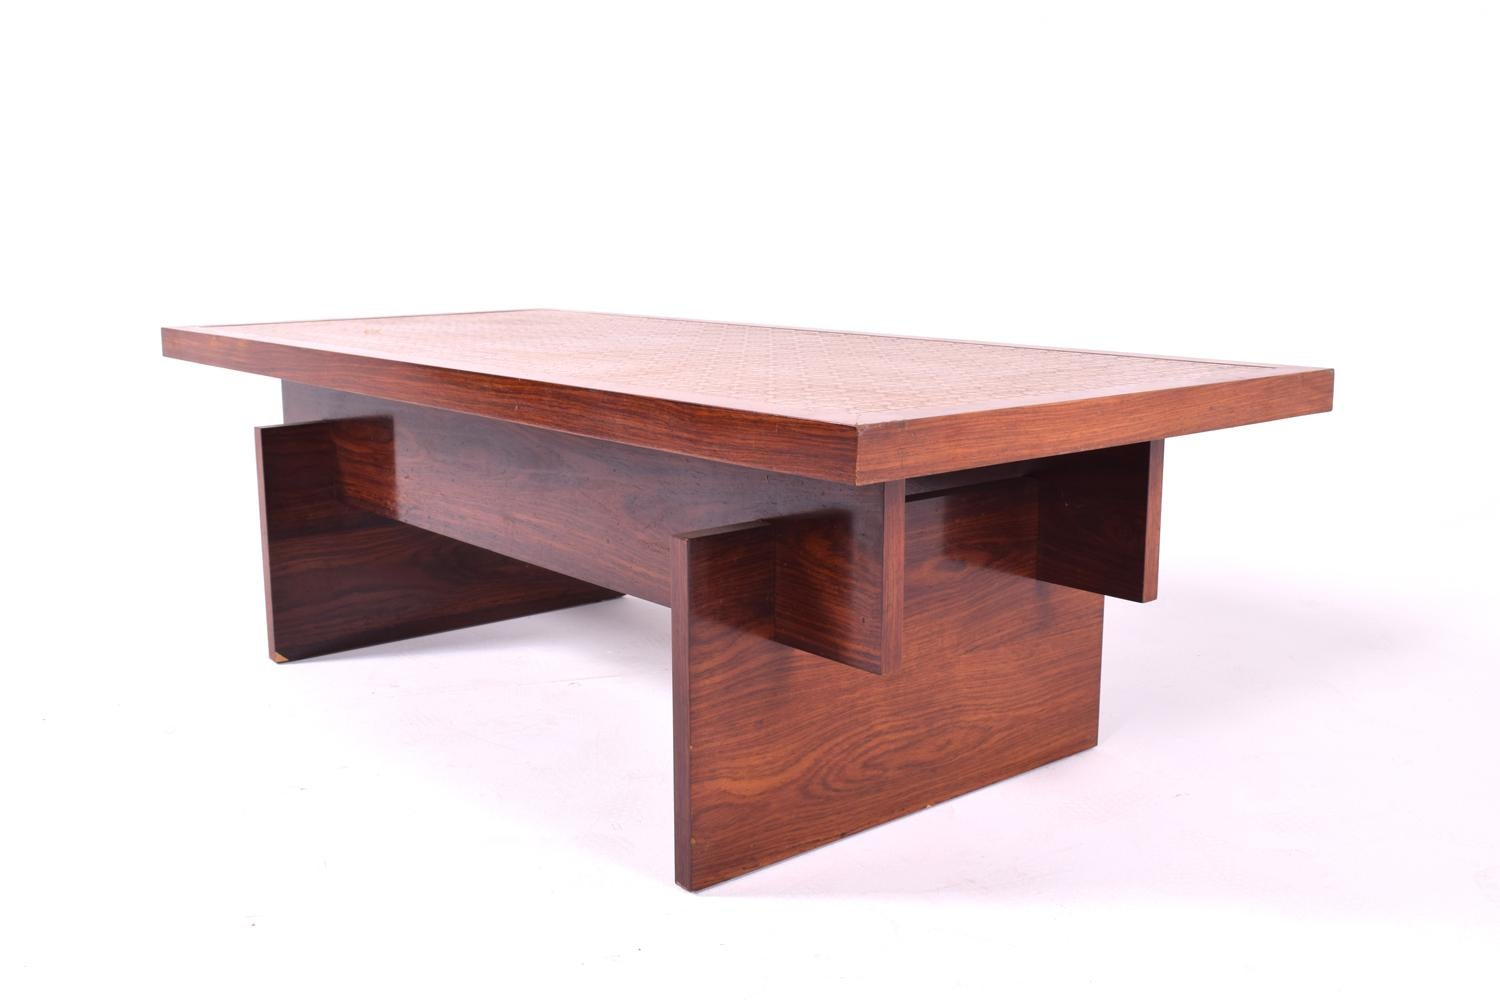 This uncommon coffee table has a very subtle form and construction details, but very striking rosewood base supporting a top of textured copper.
Geometric shapes with a great contrast between the different materials, exotic rosewood veneer with a